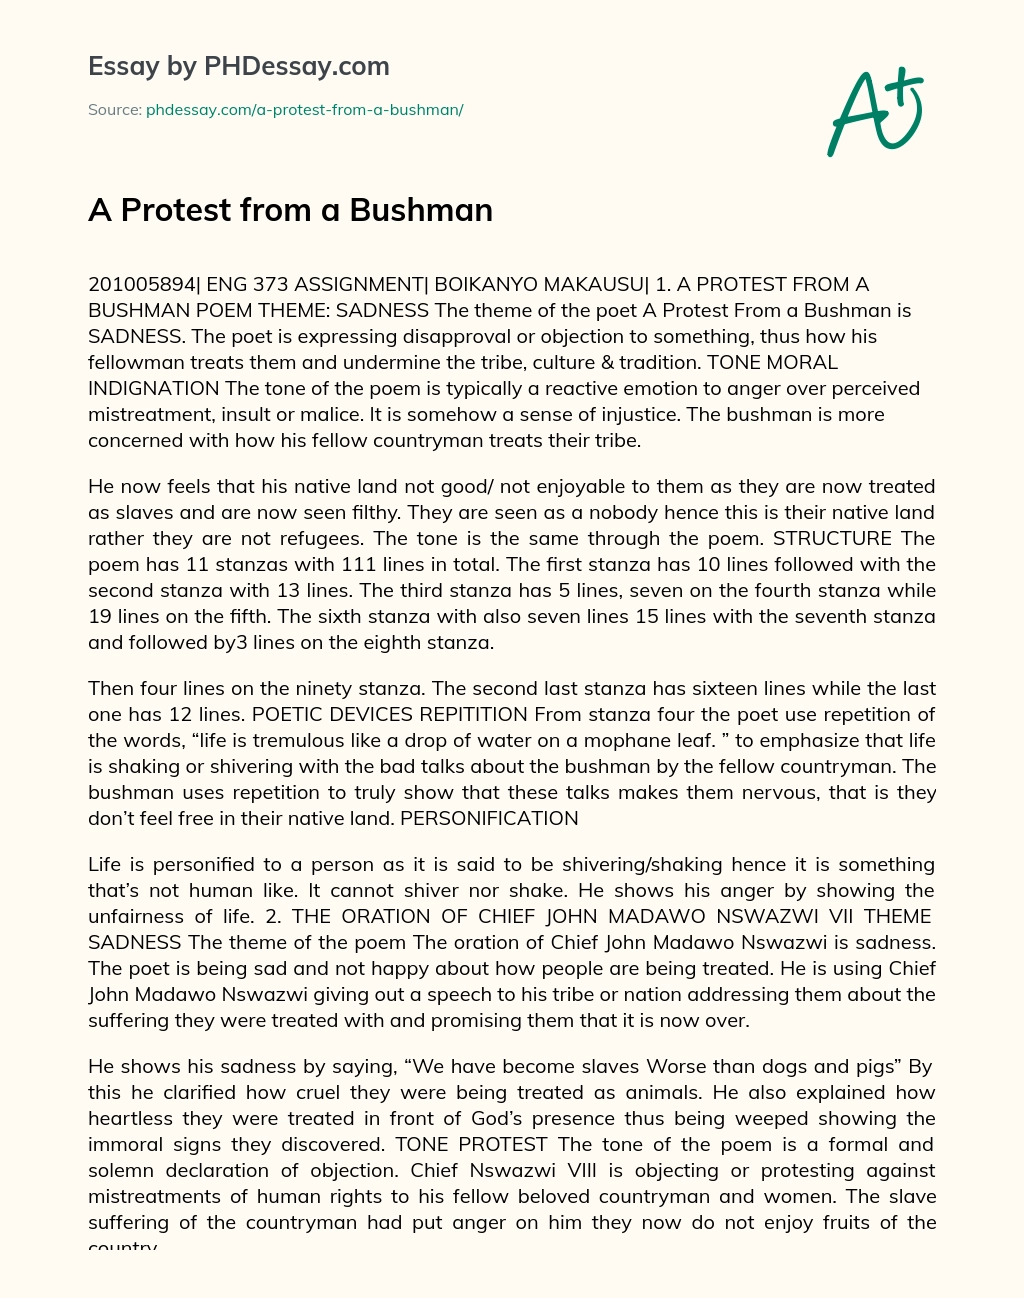 A Protest from a Bushman essay